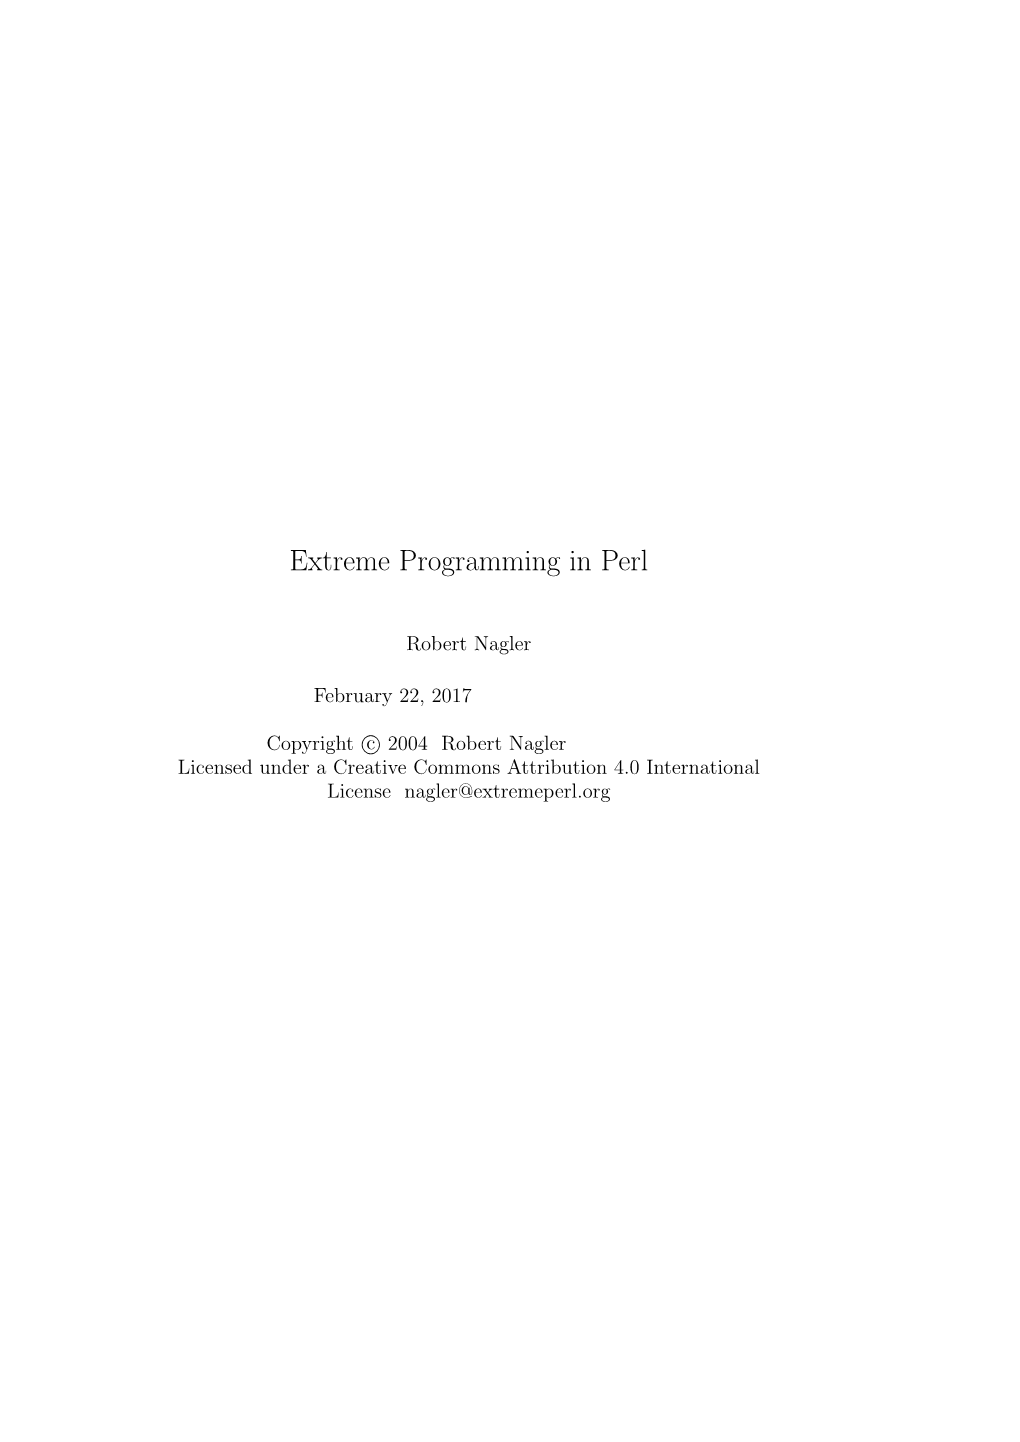 Extreme Programming in Perl